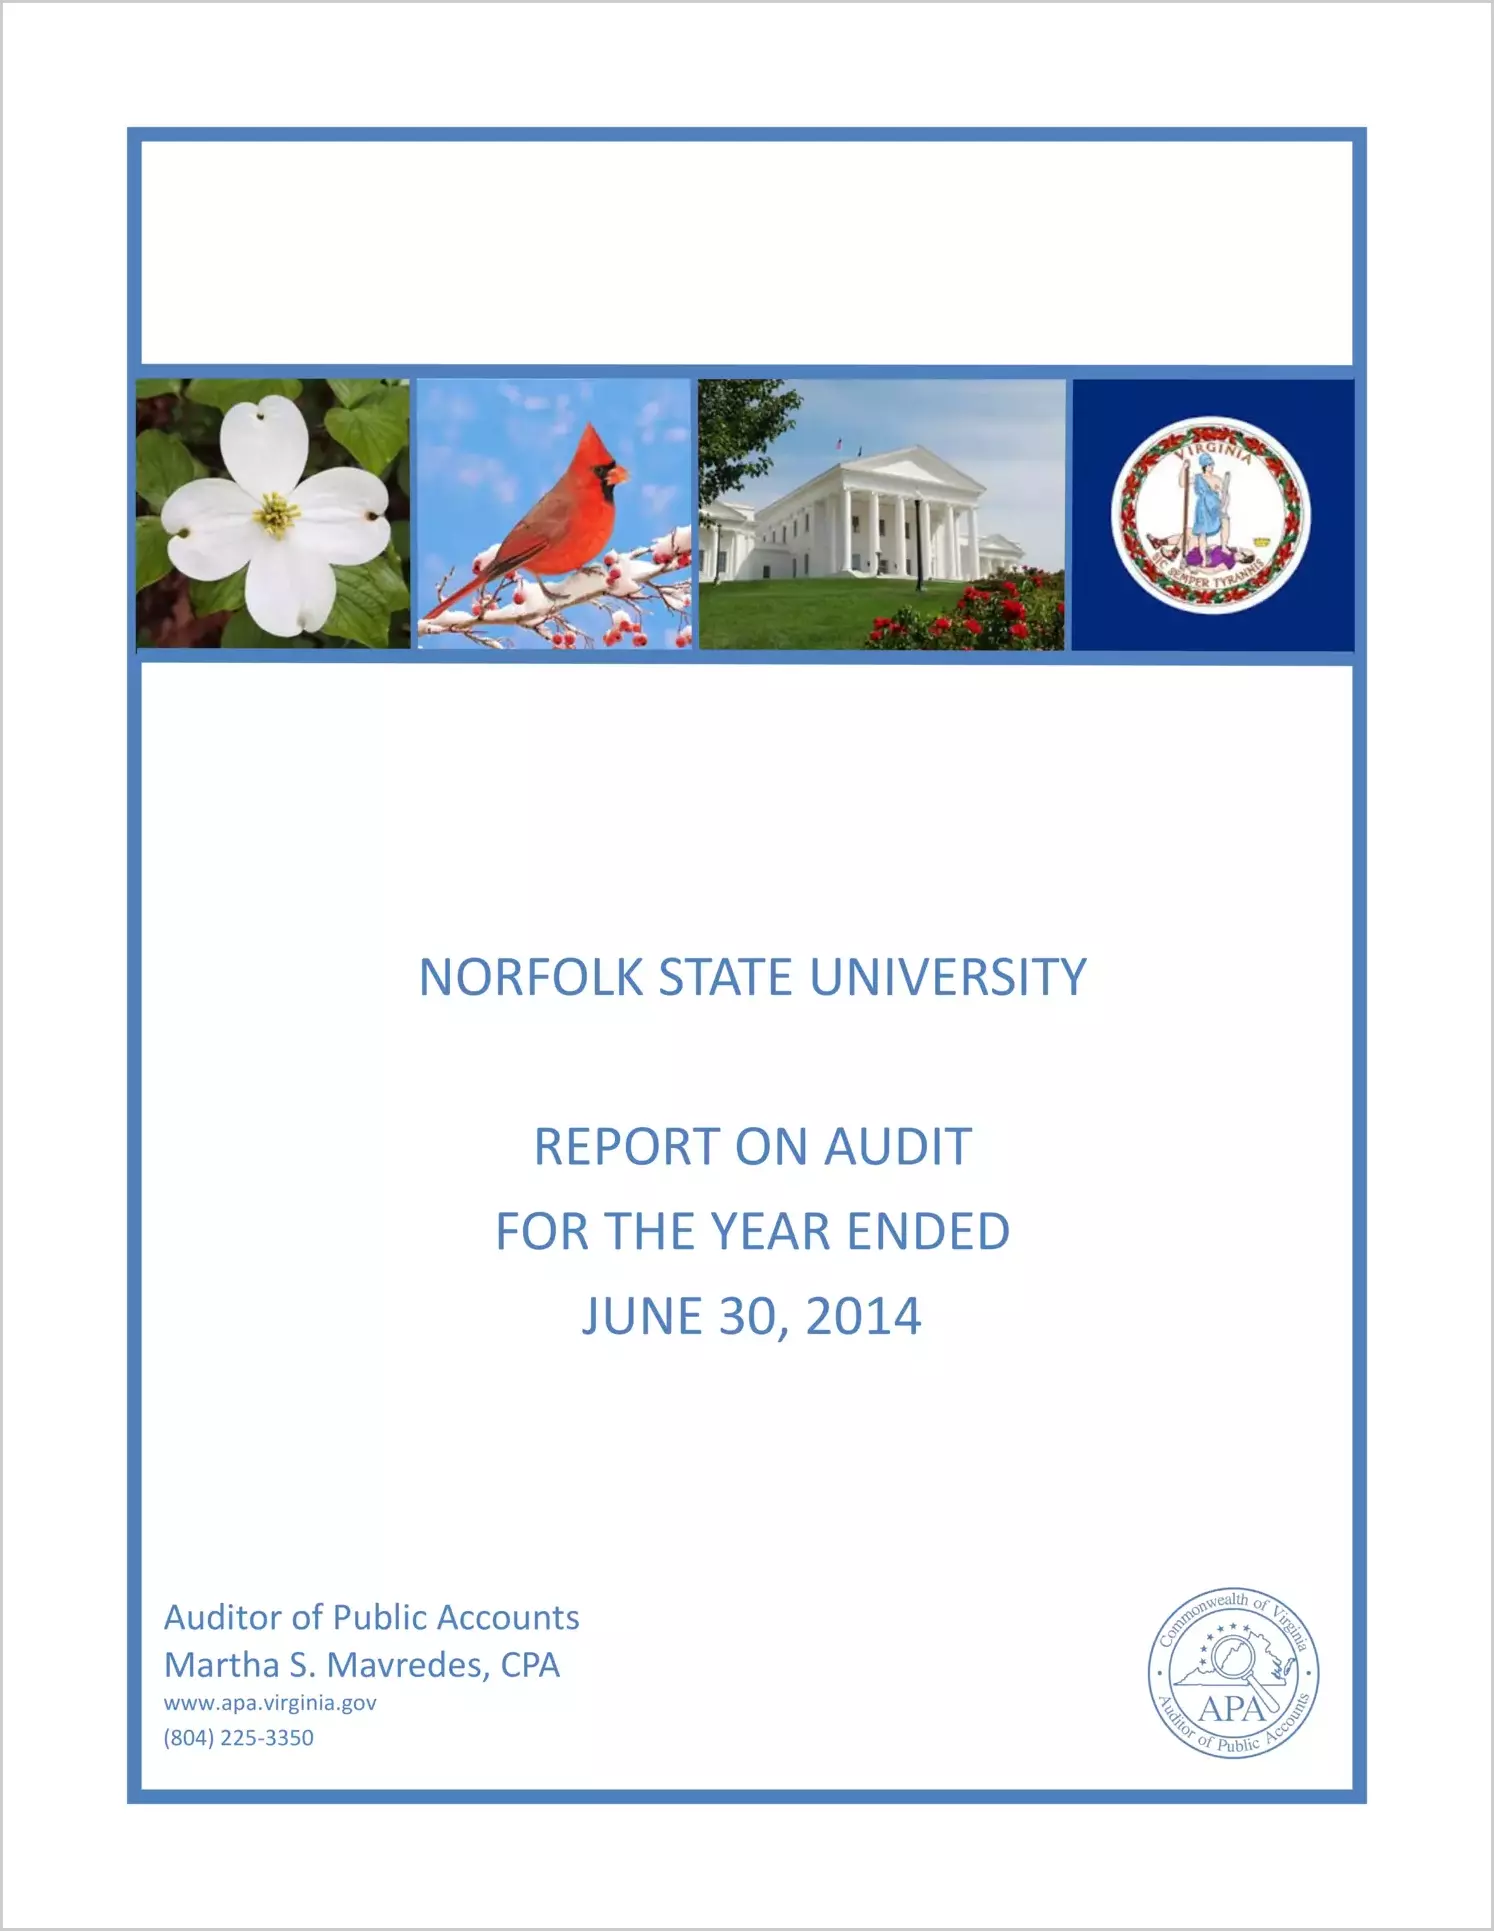 Norfolk State University report on audit for the year ended June 30, 2014